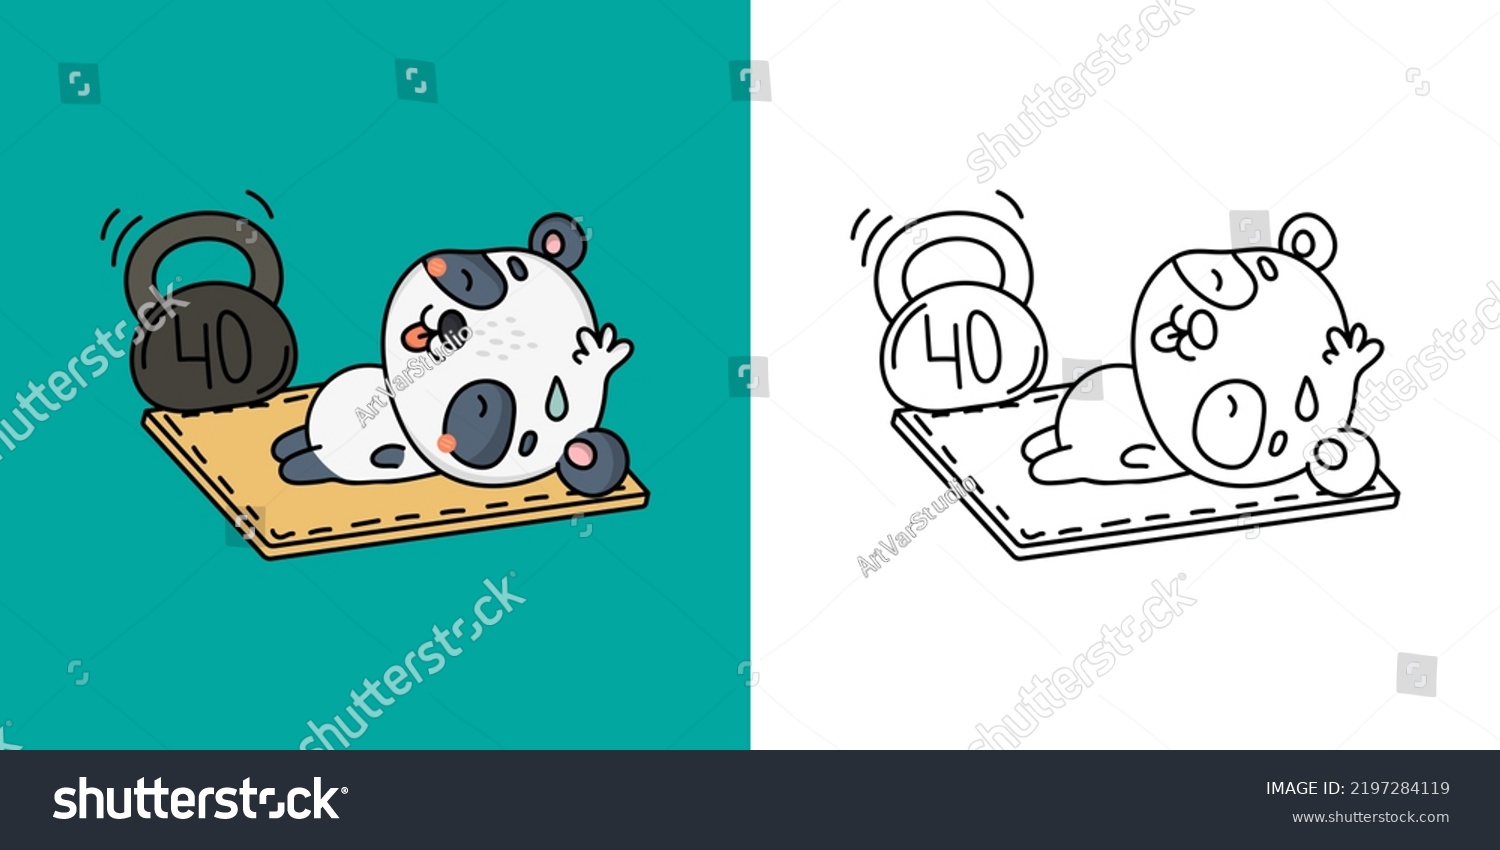 SVG of Kawaii Panda Bear Sportsman Clipart Multicolored and Black and White. Cute Panda Sportsman. Vector Illustration of a Kawaii Animal for Stickers, Prints for Clothes, Baby Shower, Coloring Pages.
 svg